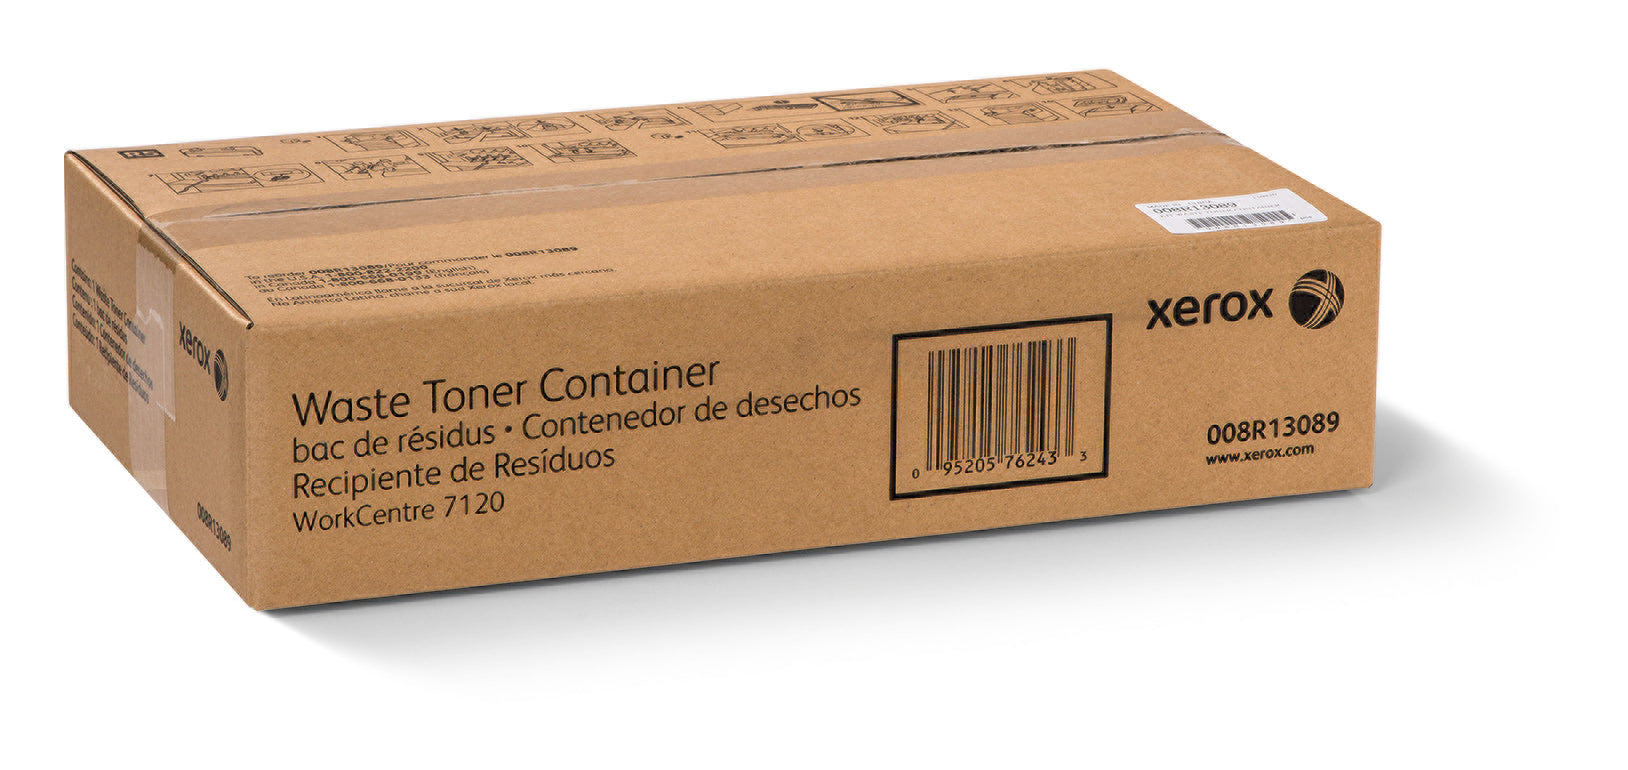 Xerox Waste Toner Cartridge 008R13089 for WorkCentre 7120 / 7125 / 7220 / 7225 / 7220i / 7225i